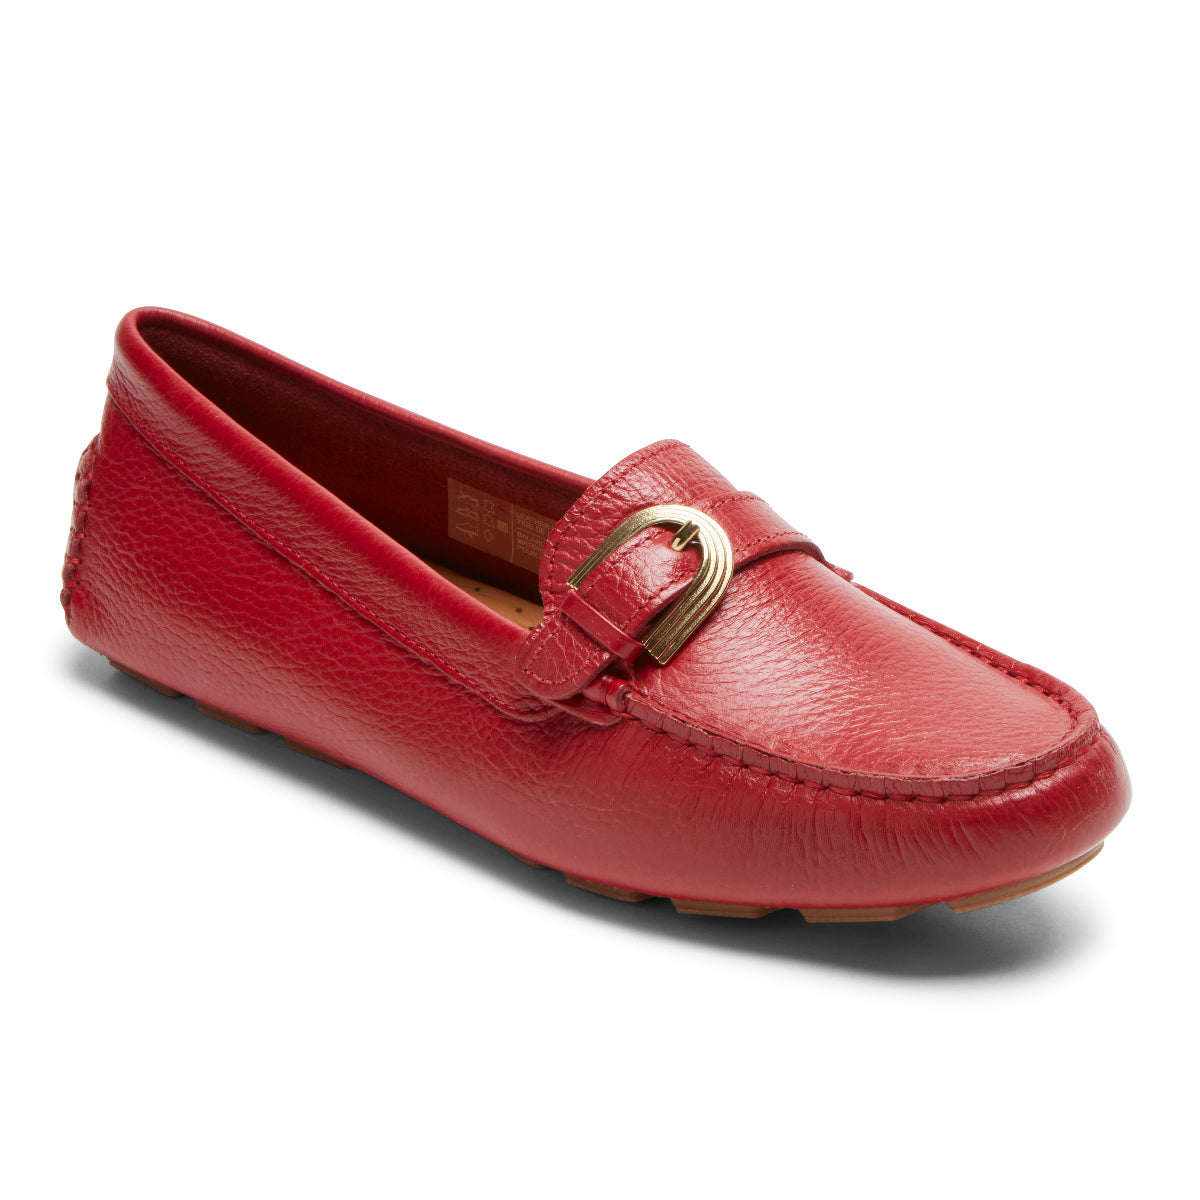 Rockport Womens Bayview Buckle Loafer